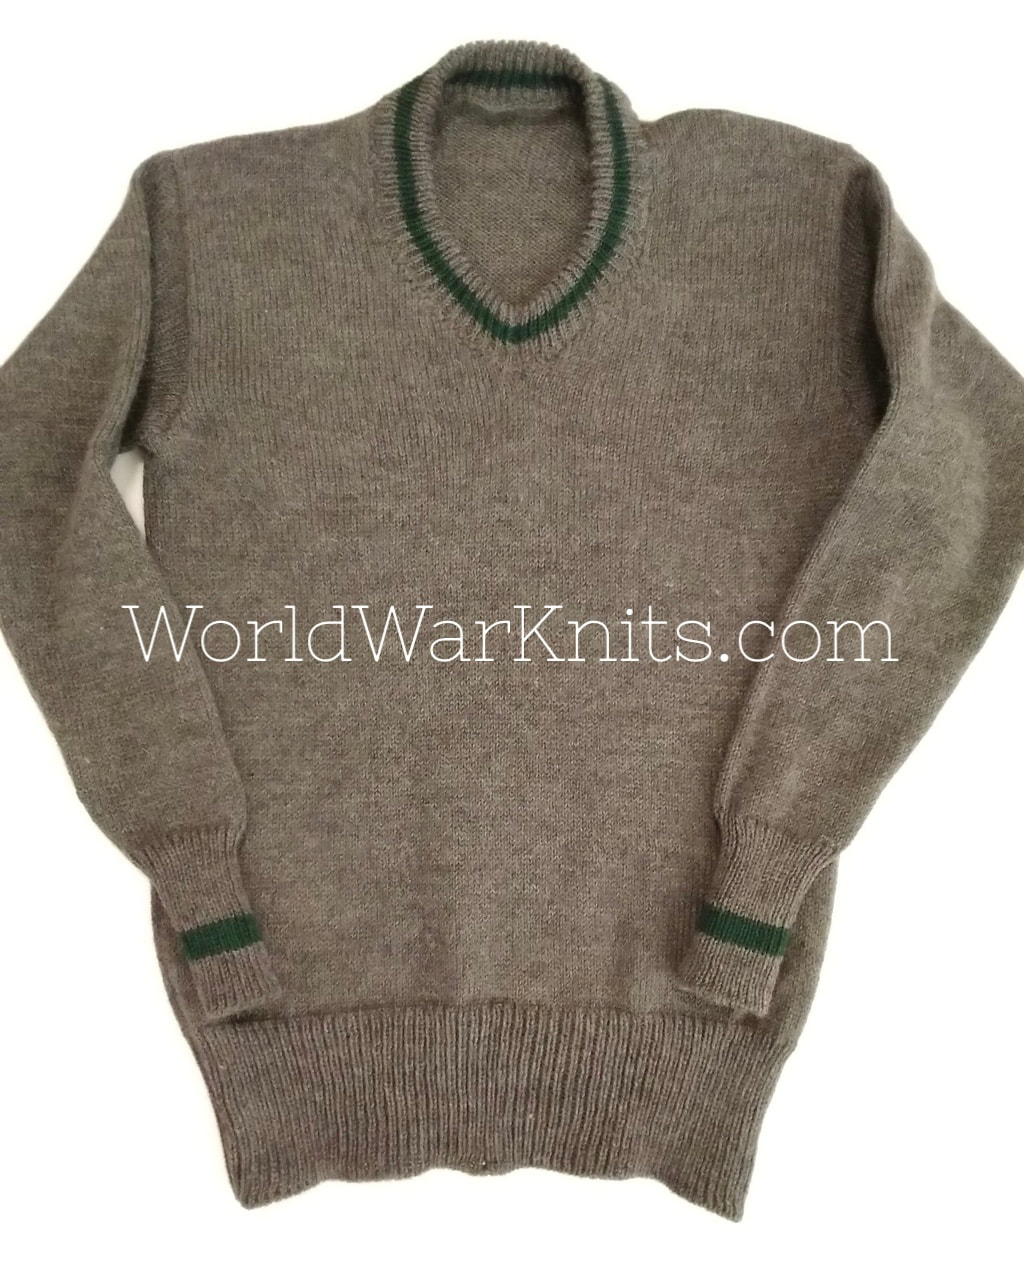 WWII German sweater reproduction. 